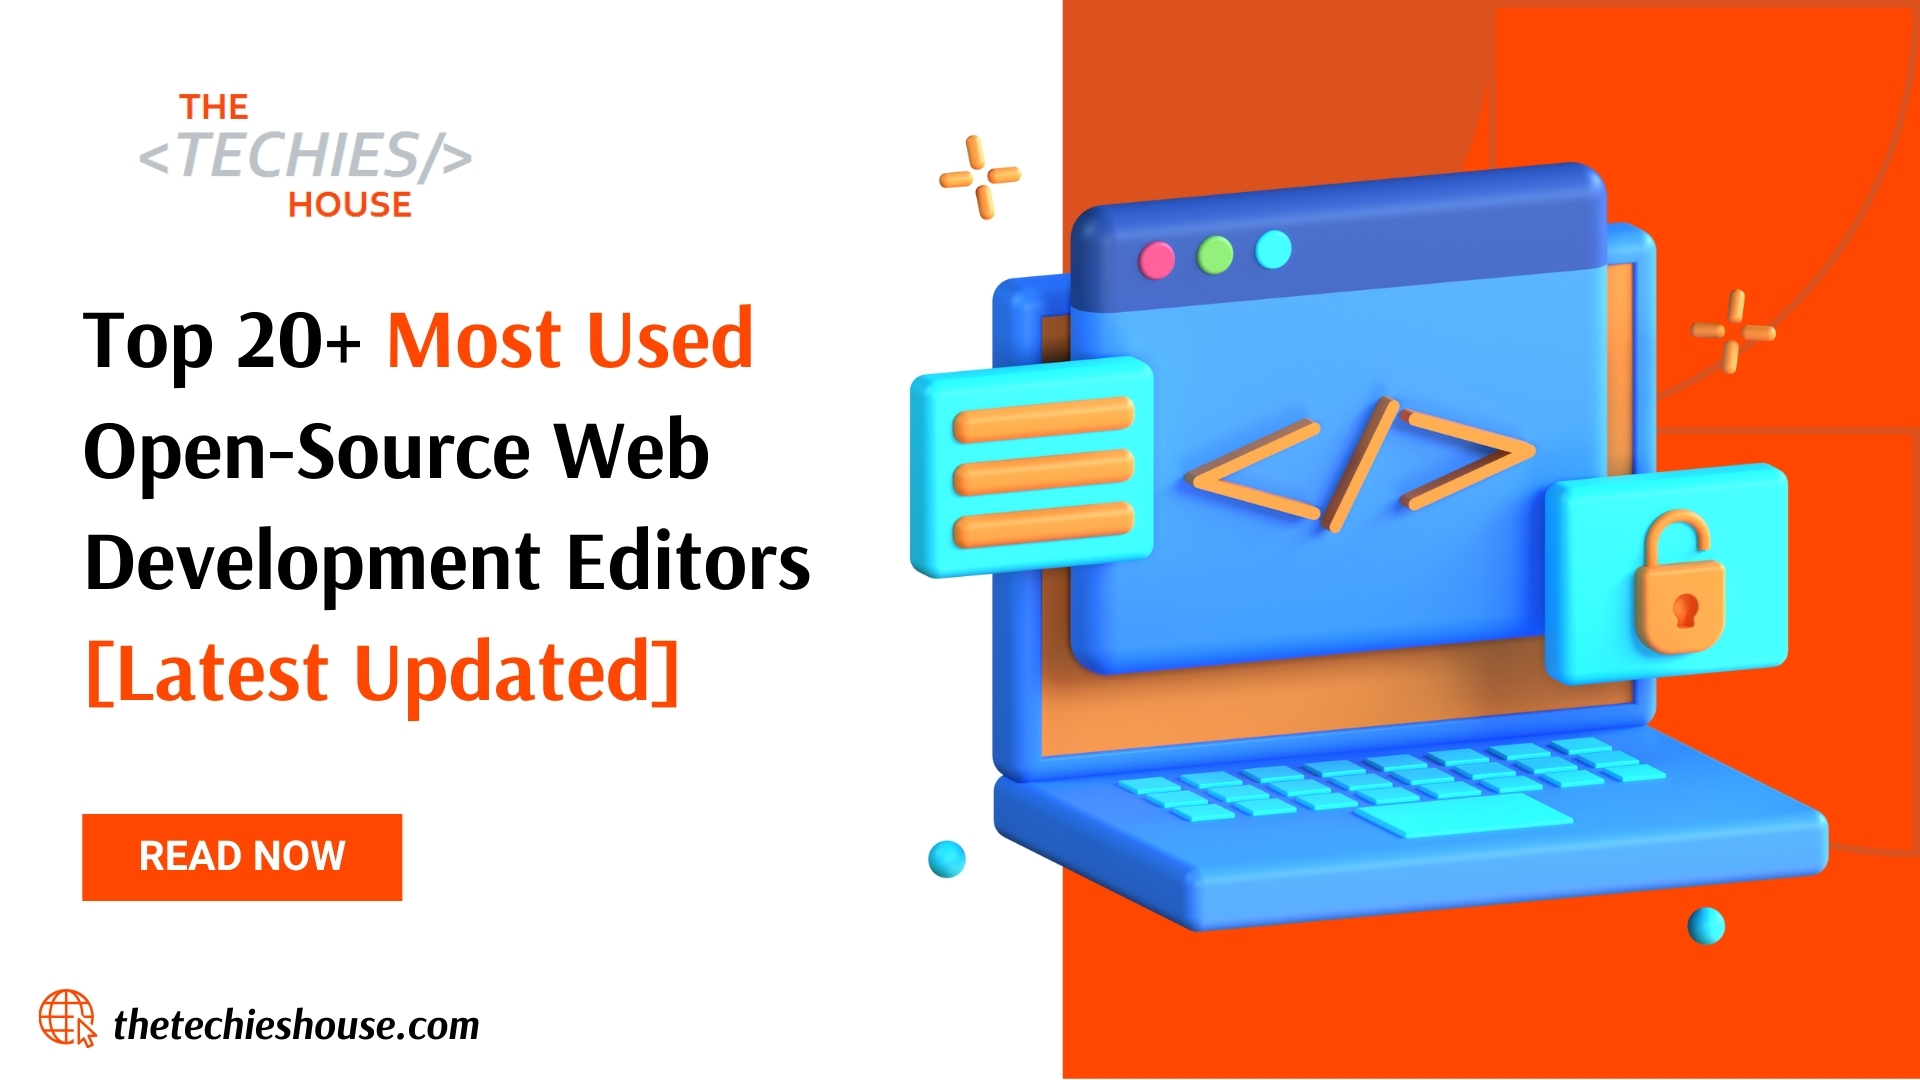 Top 20+ Most Used Open-Source Web Development Editors [Latest Updated]